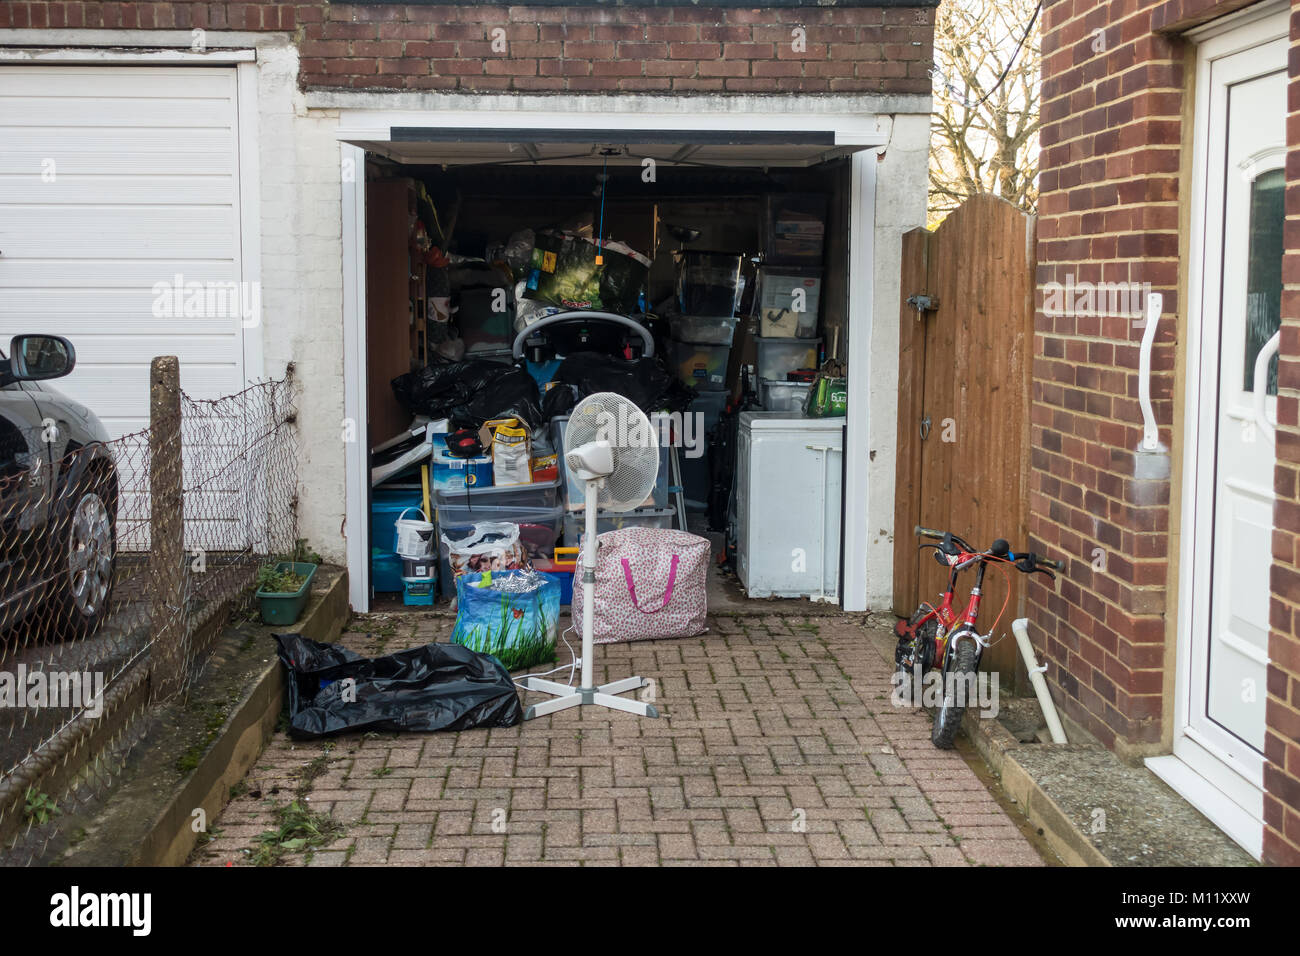 Looking down a residential driveway at an open garage which is filled with clutter and belongs kept in storage inside. Stock Photo